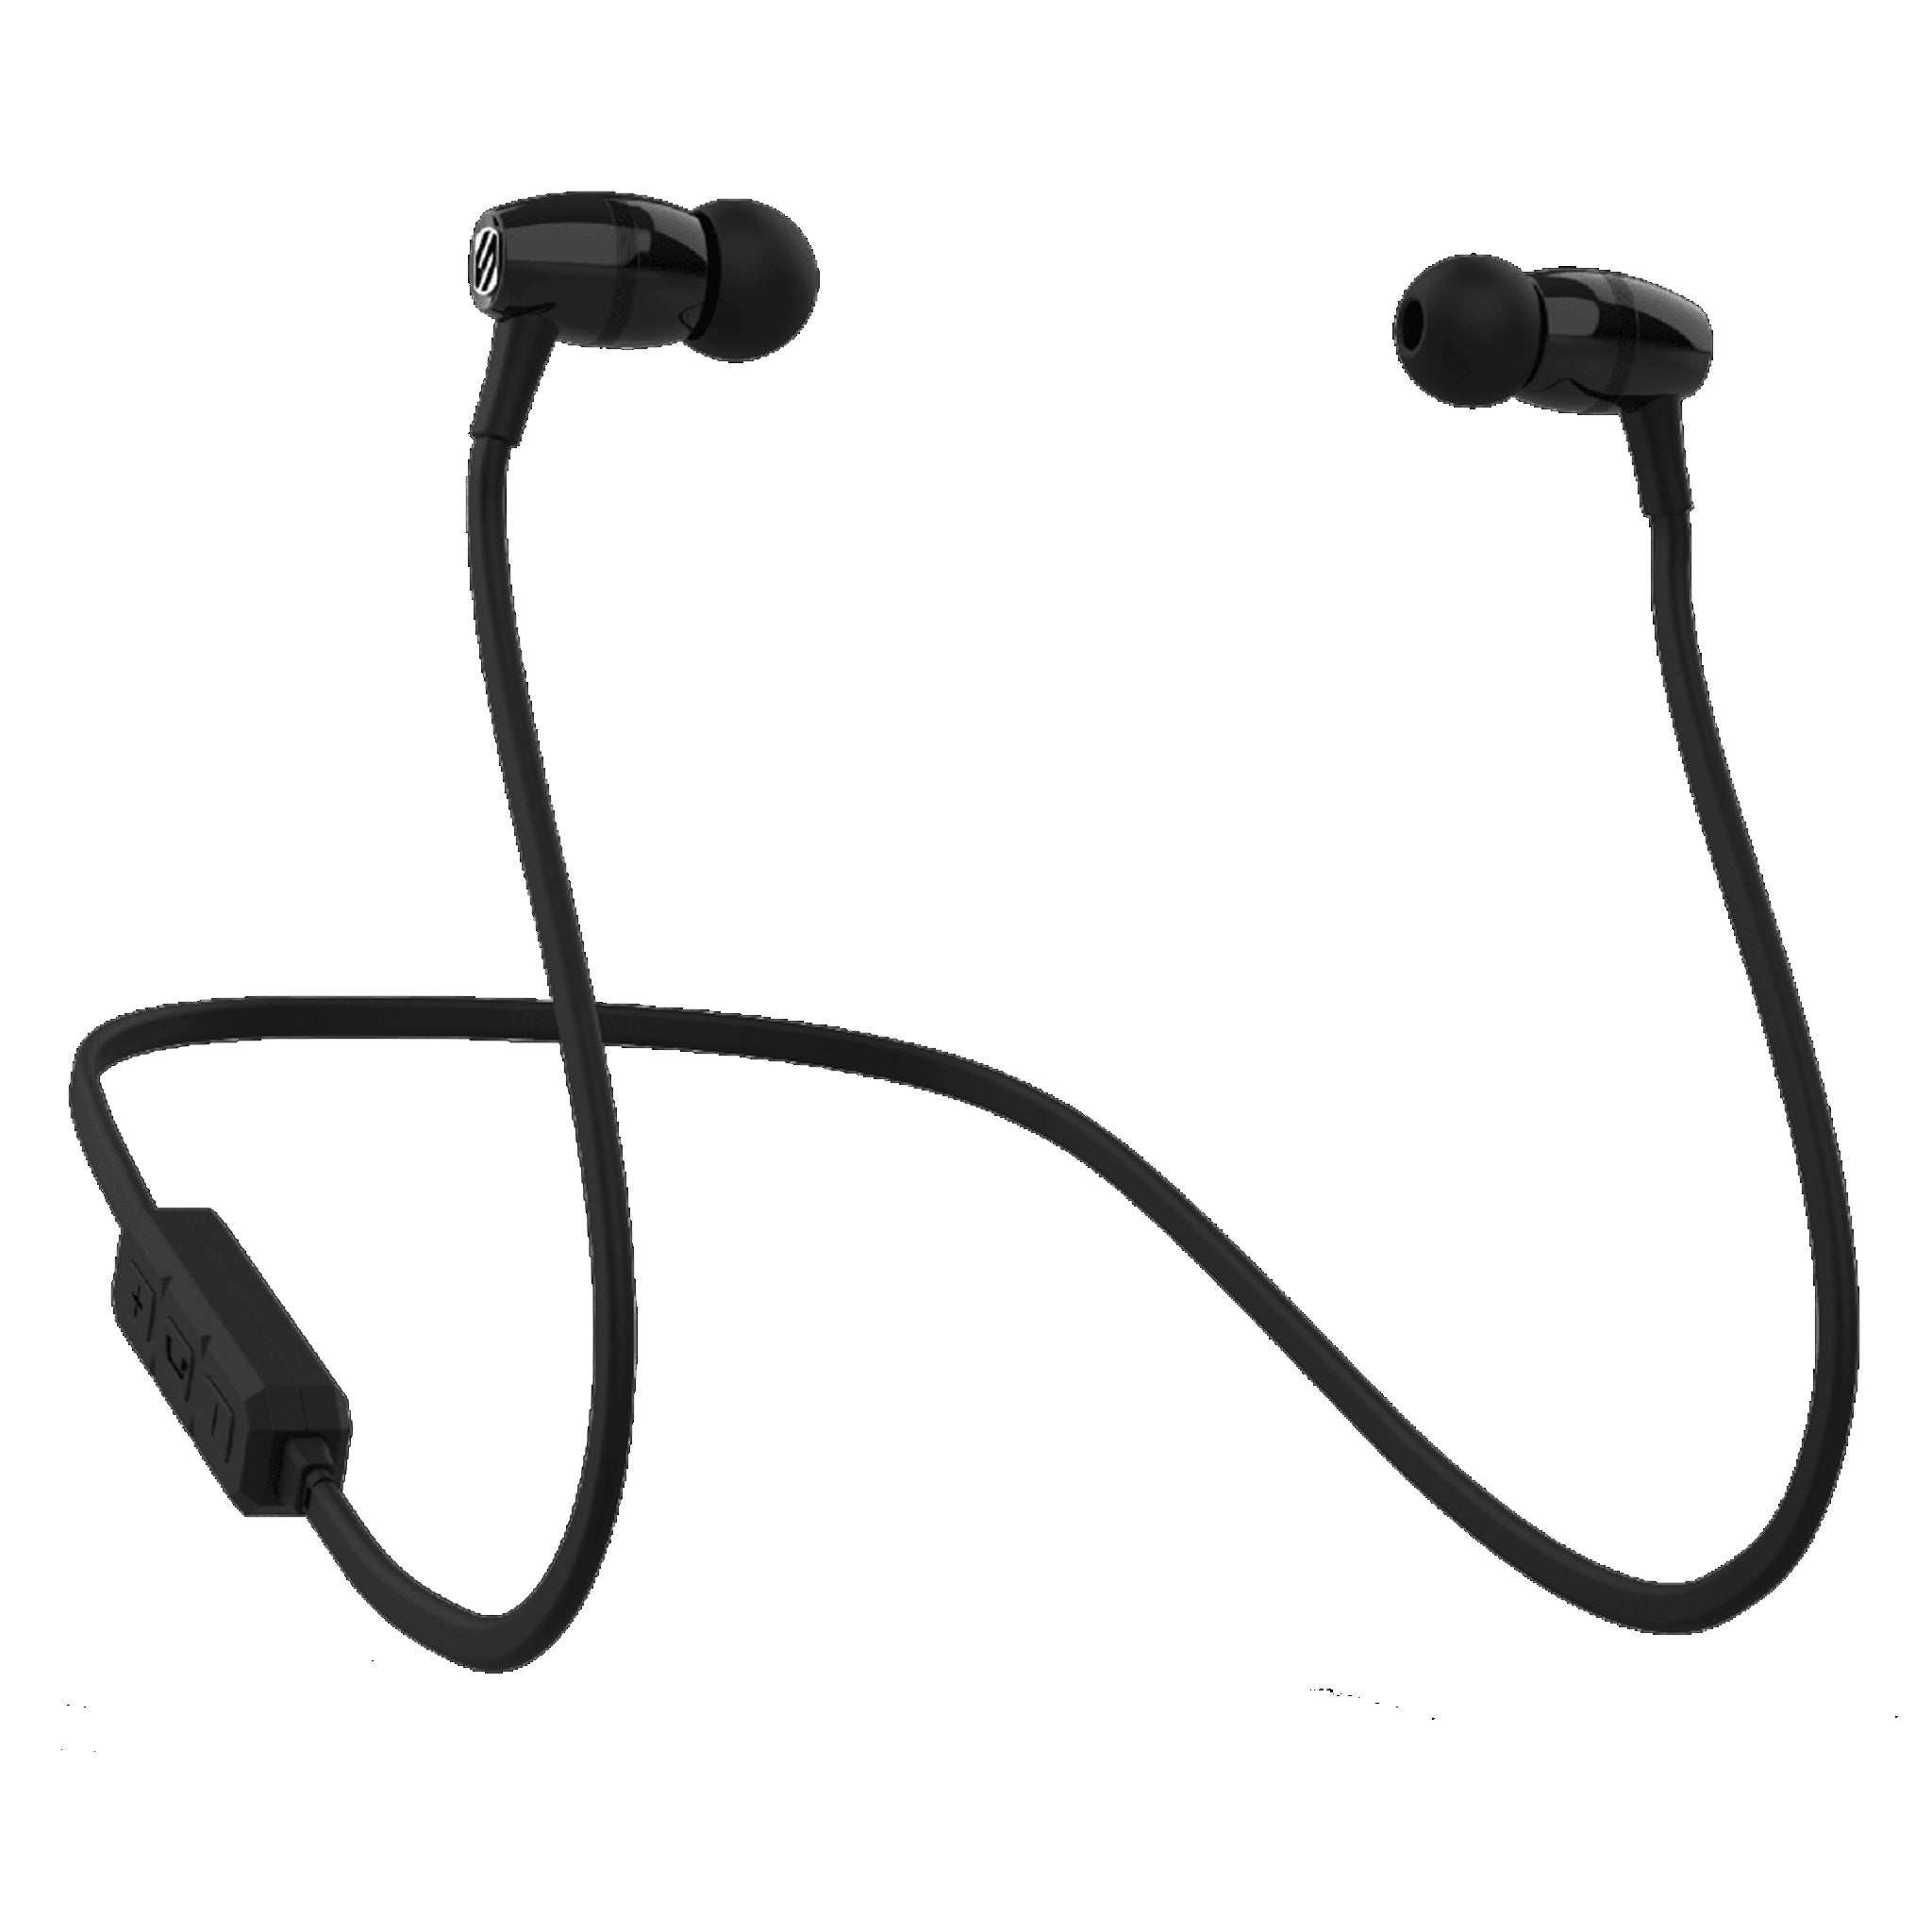 Scosche - Bluetooth In Ear Wireless Earbuds With Mic Controls - Black